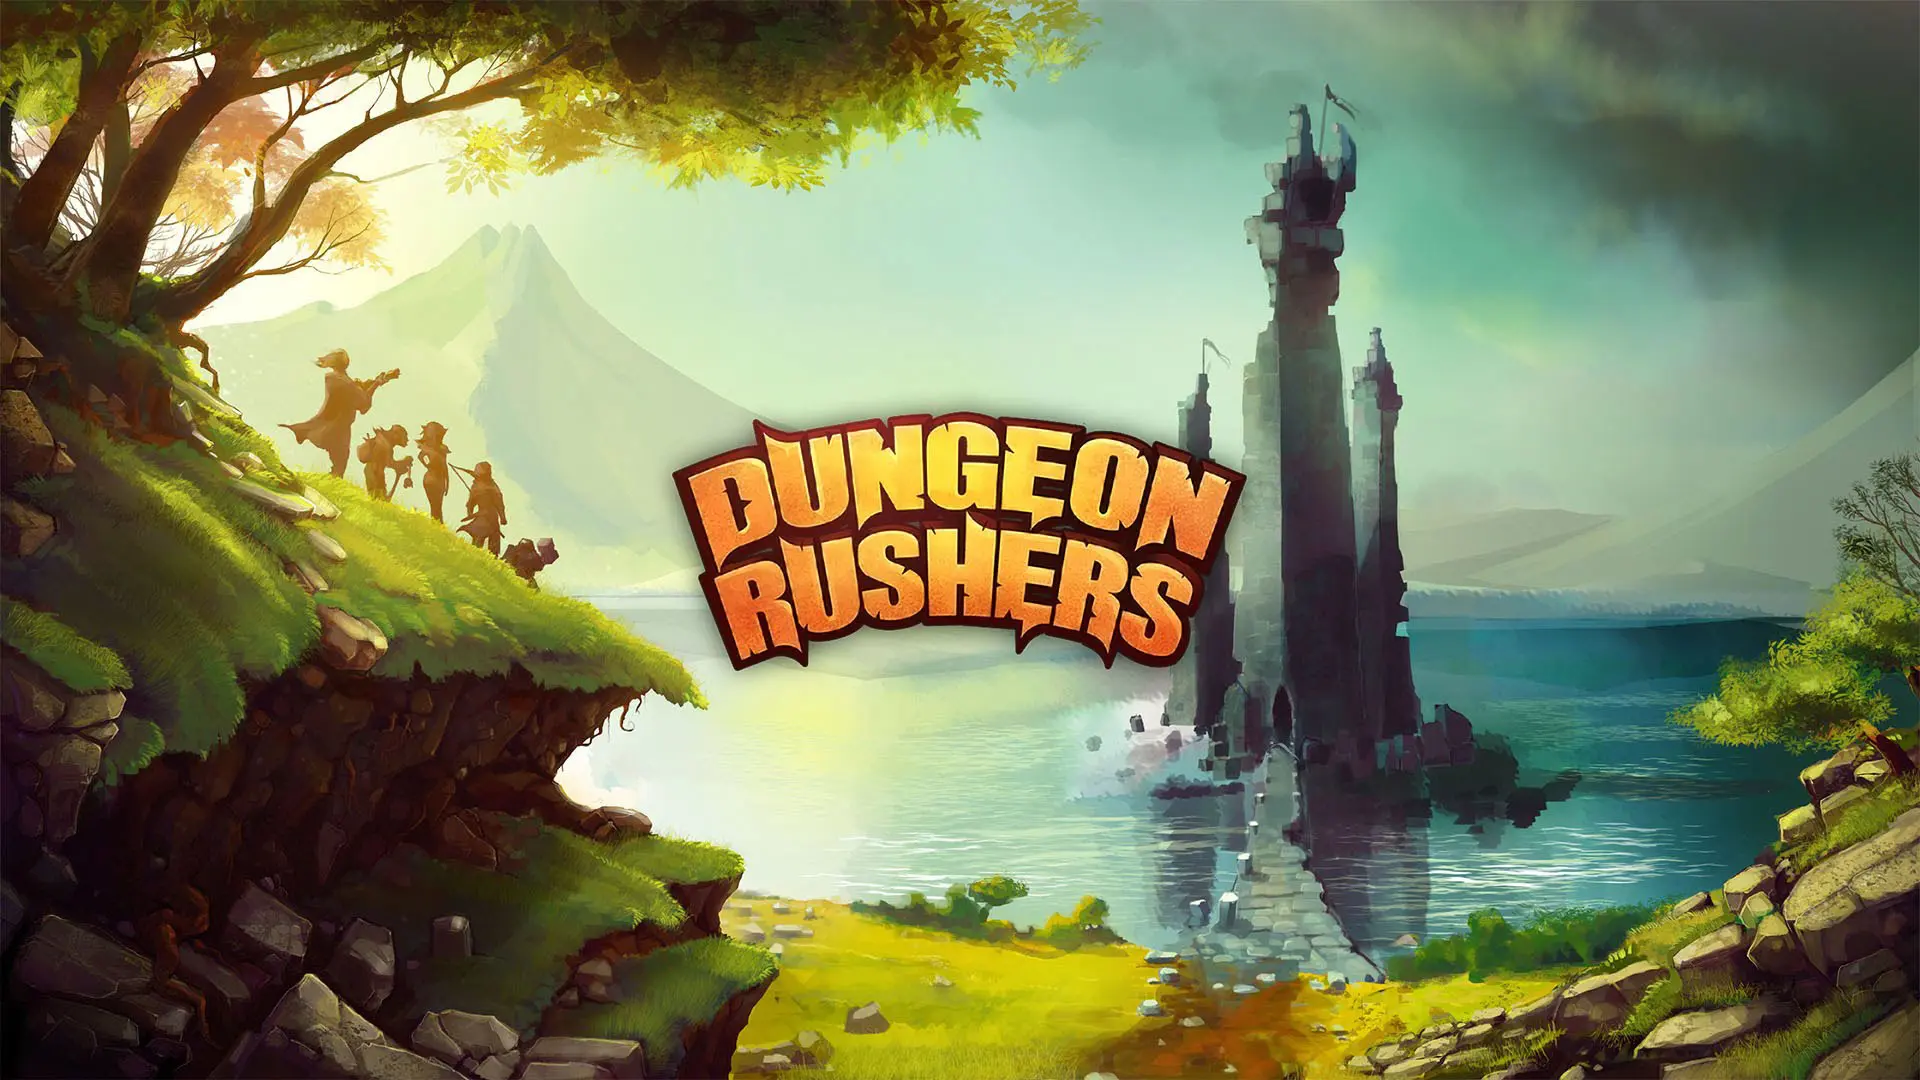 Dungeon rushers Game Ios Free Download